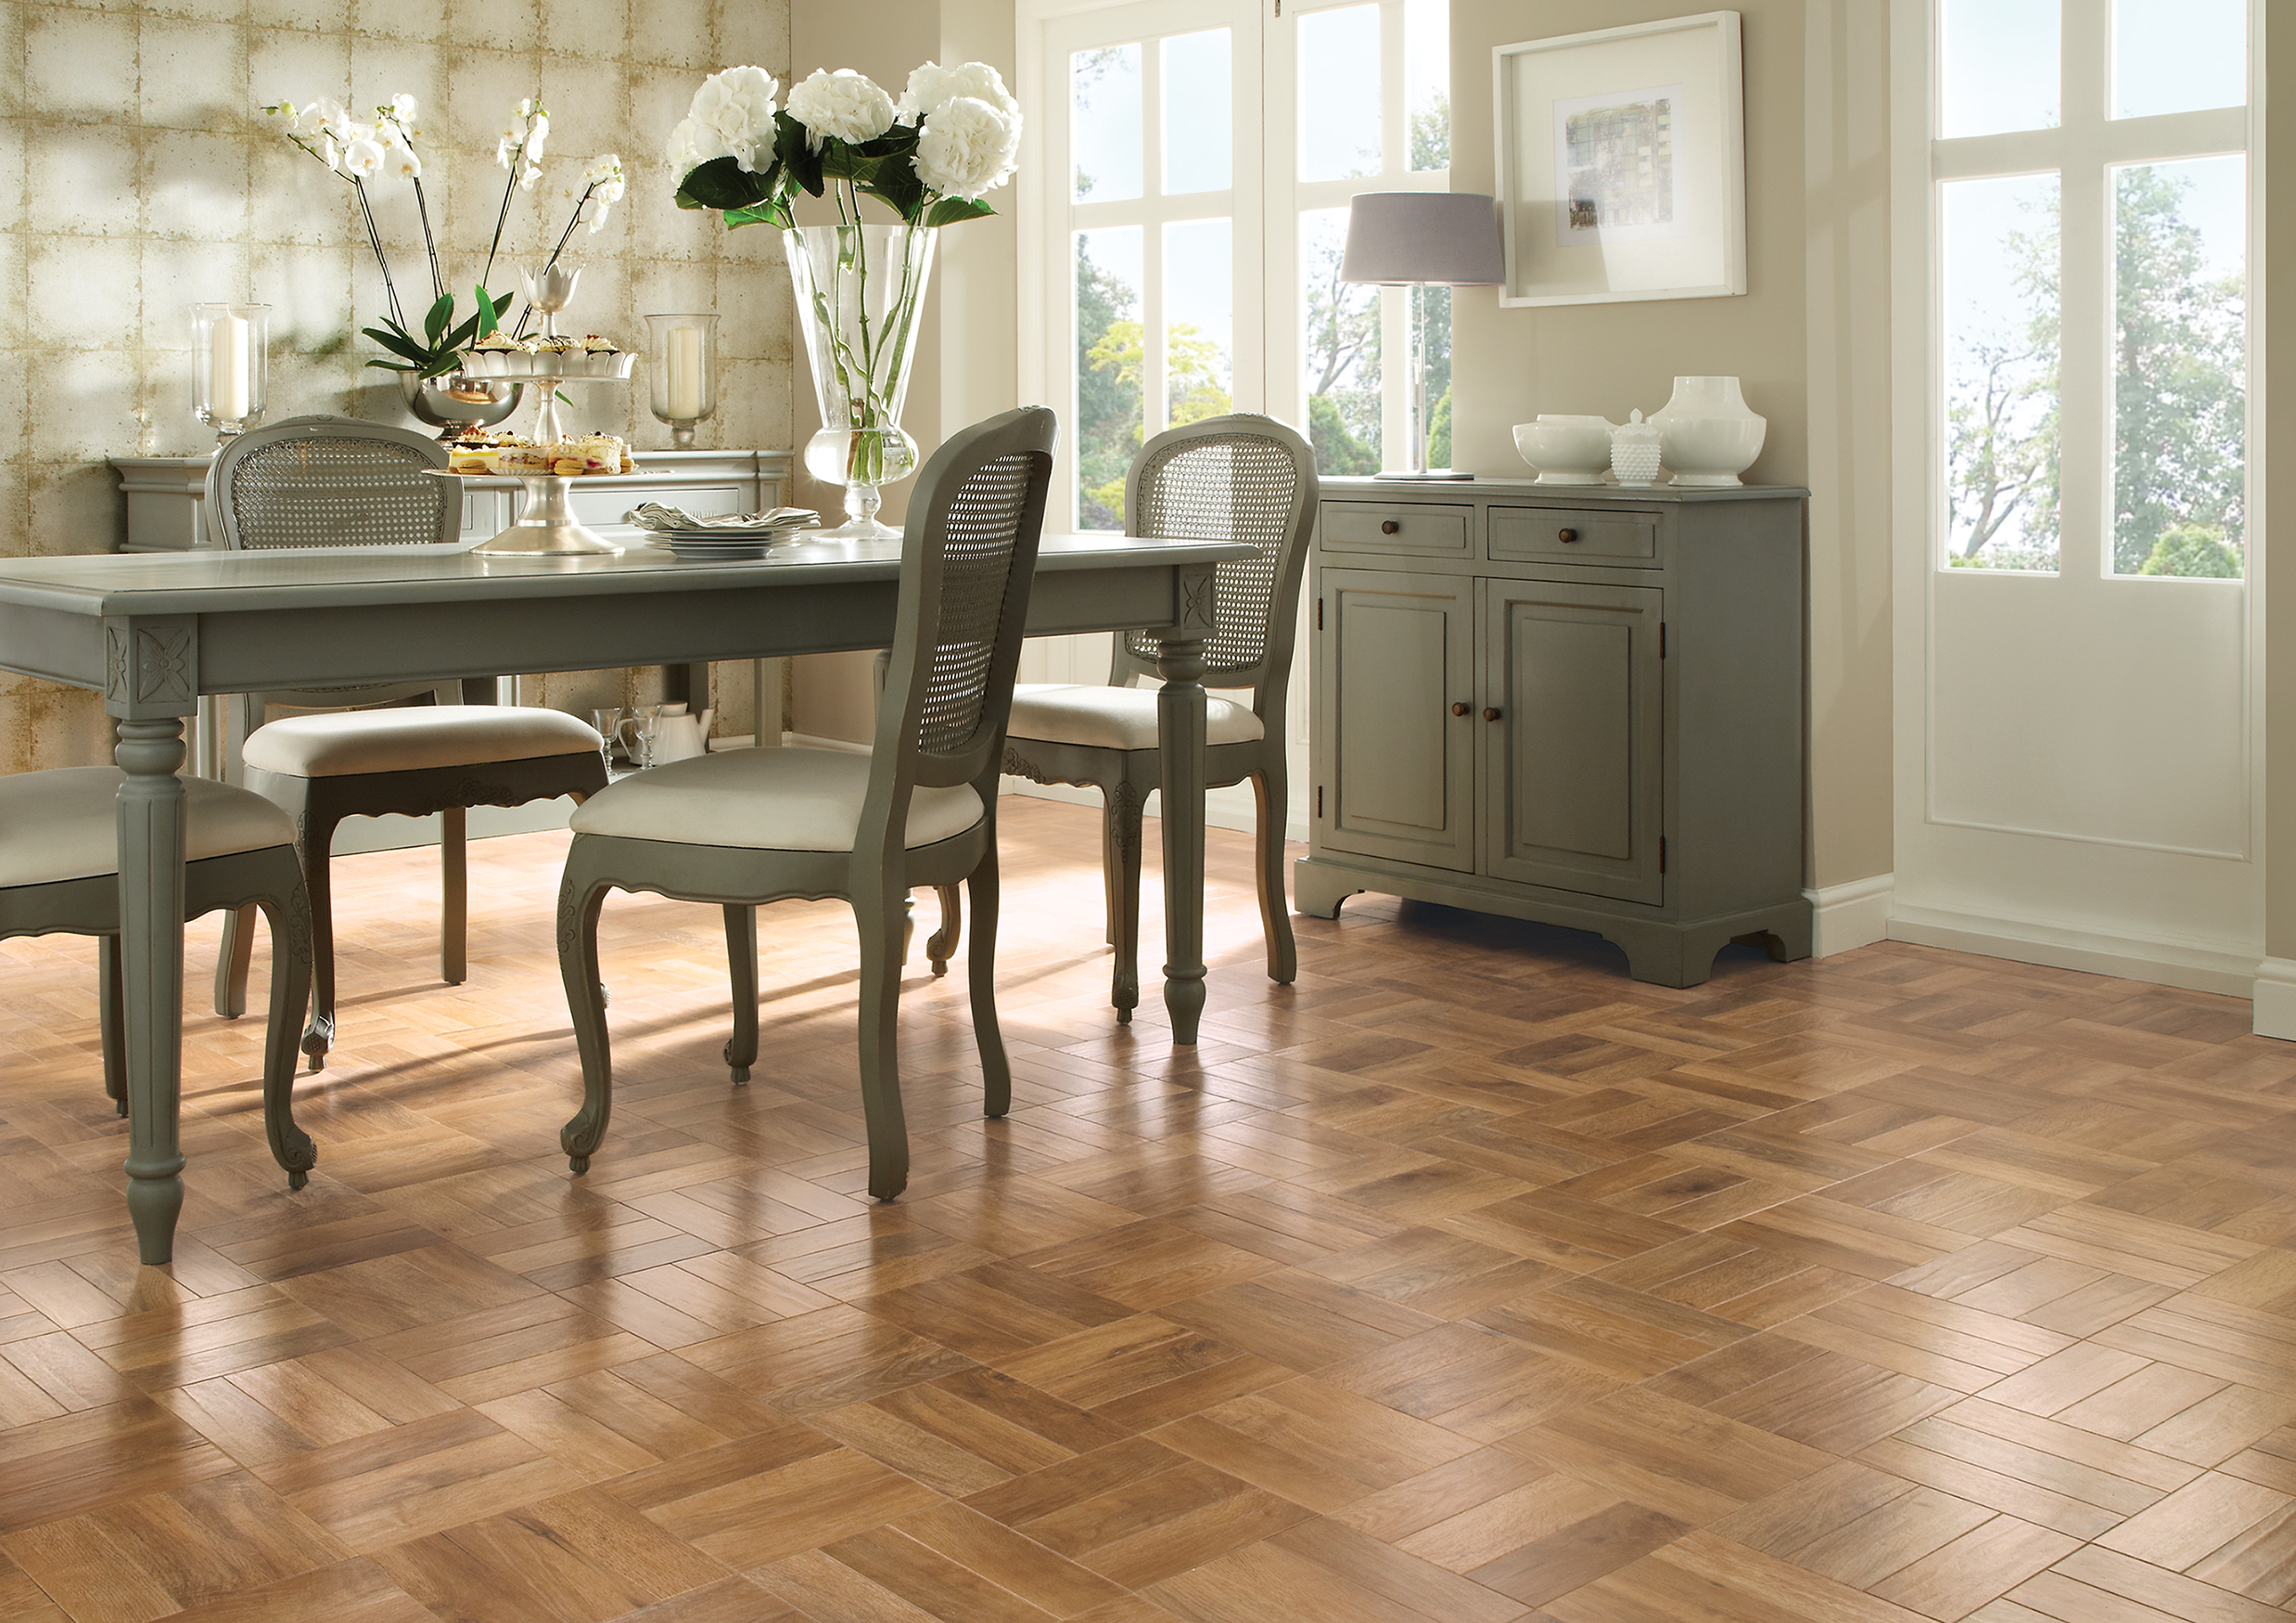 Contact Us | Phone | Email | Address | Pauls Floors Flixton, Manchester